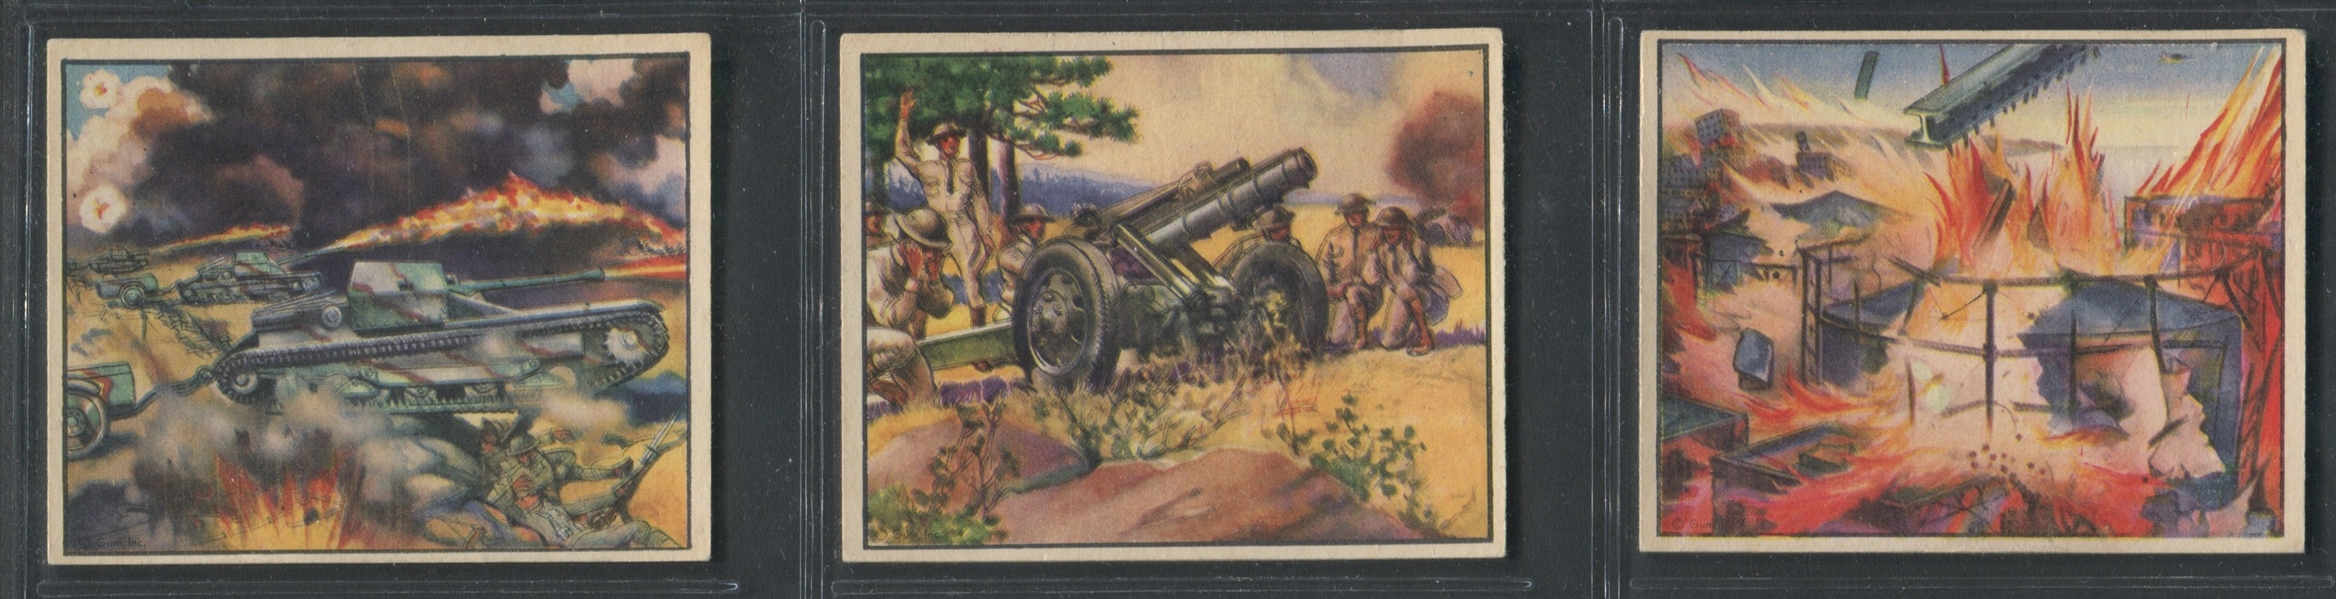 R165 Gum Inc War News Pictures Lot of (21) Cards